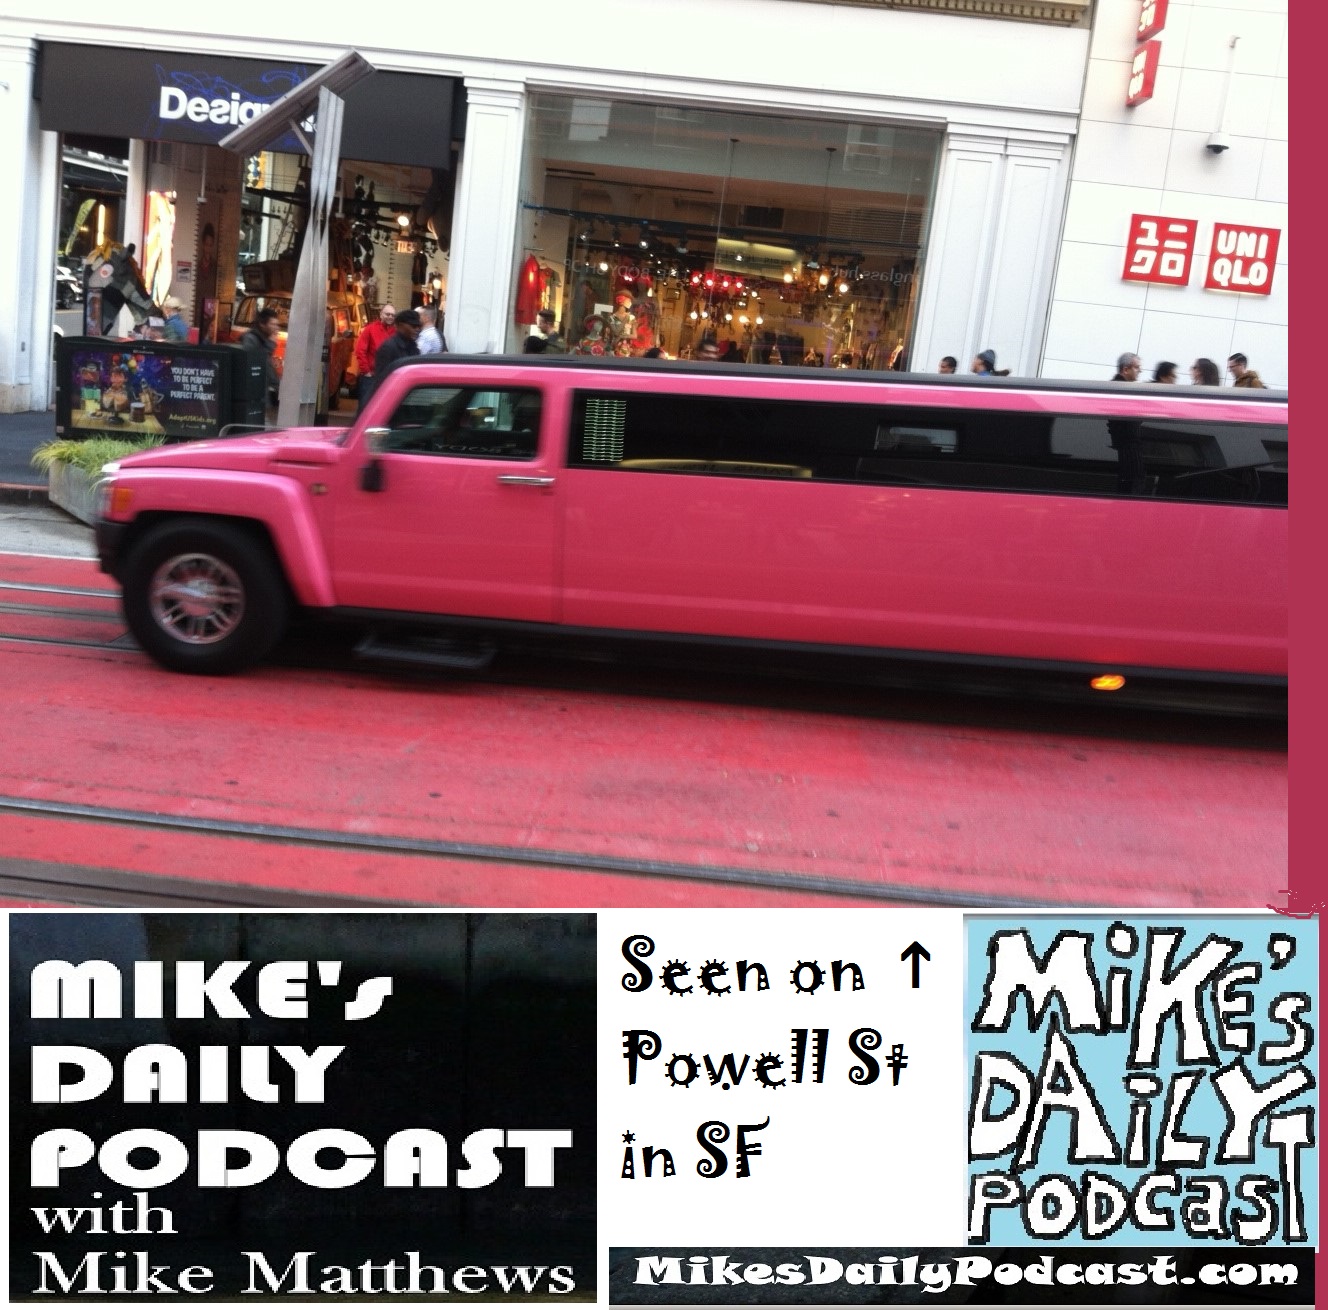 MIKEs DAILY PODCAST 1098 pink hummer limo